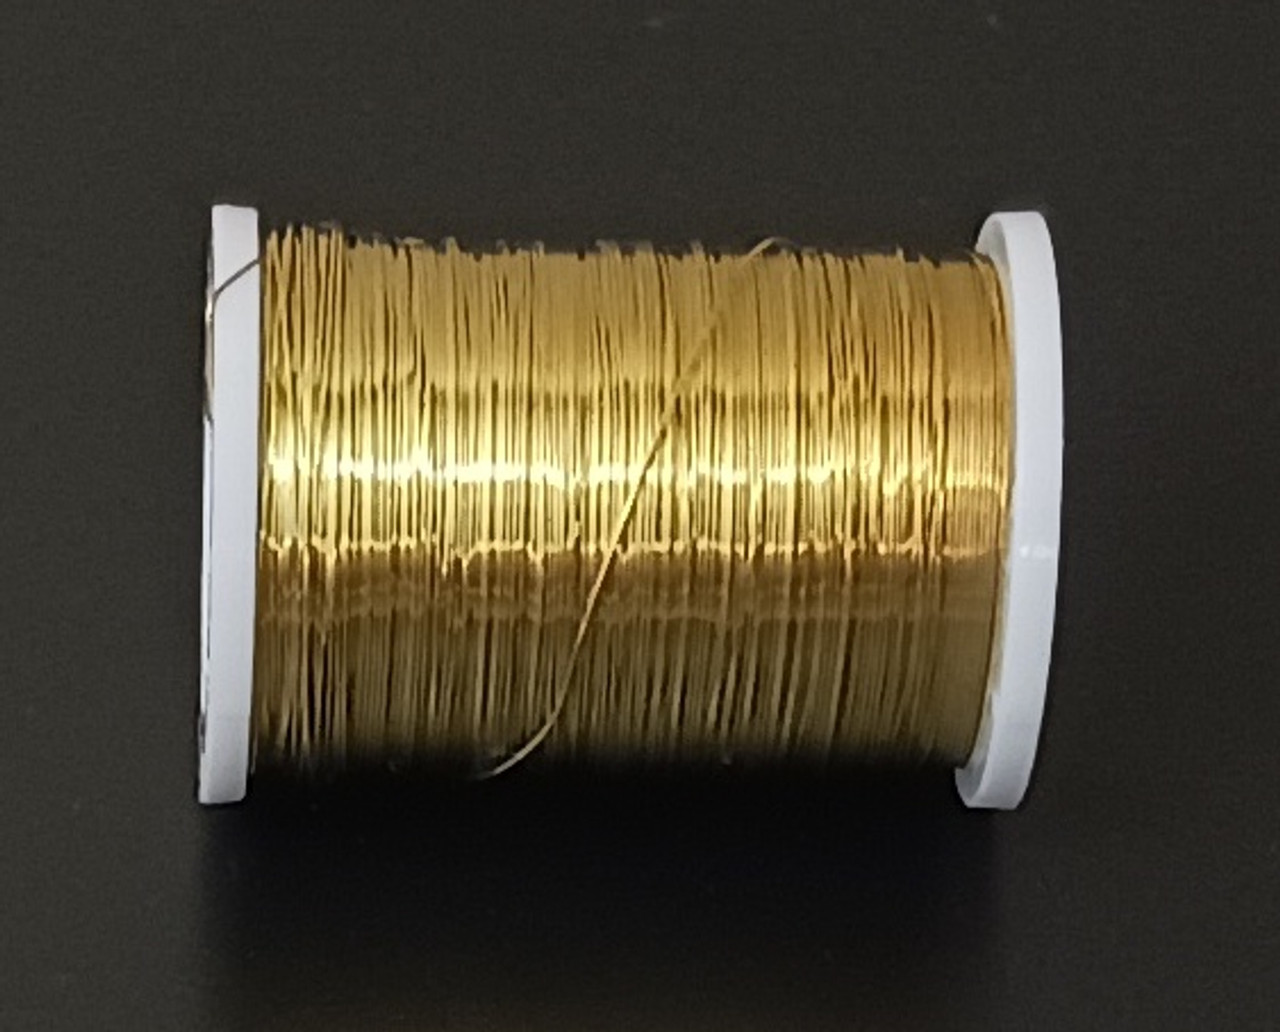 24yds of 34 Gauge Colored Craft Wire - Gold